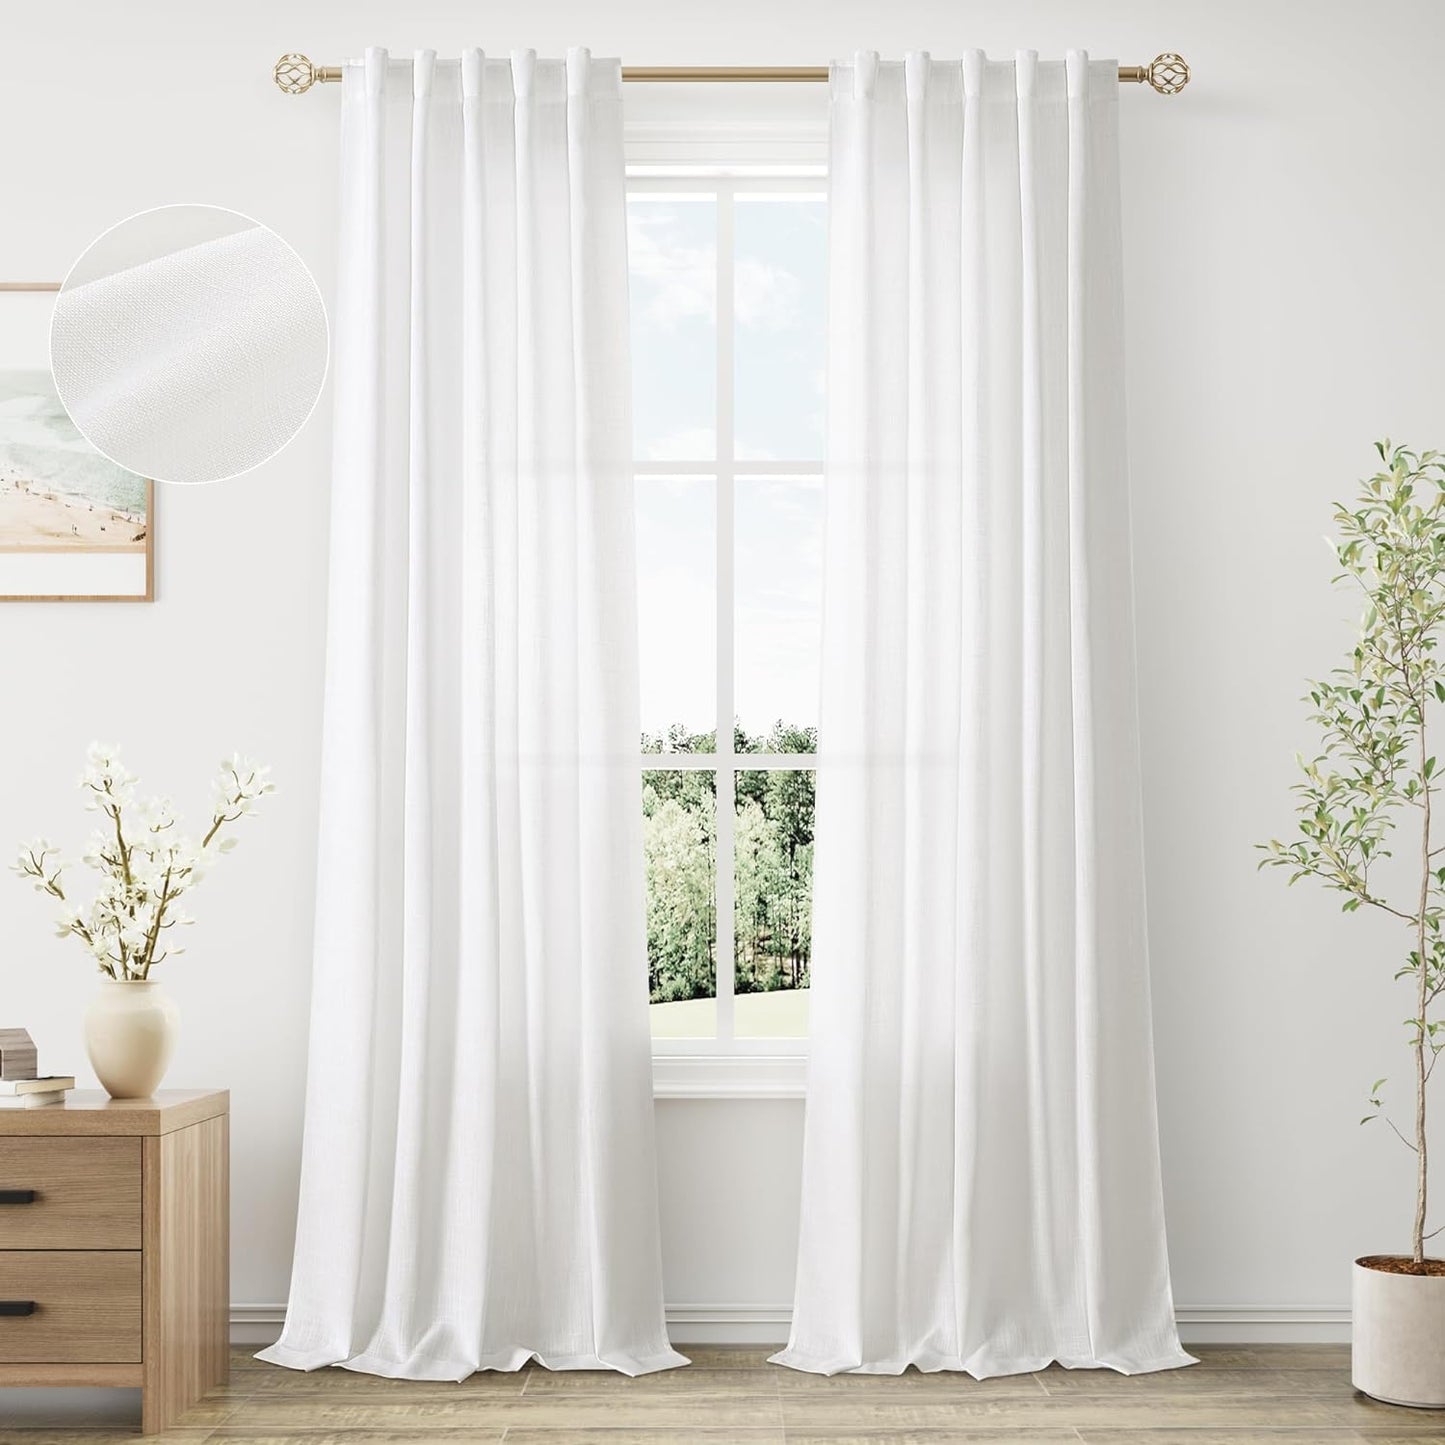 Natural Linen Sheer Curtains 84 Inch Long for Living Room Bedroom Back Tab Light Filtering Privacy Farmhouse Rod Pocket Ivory off White Neutral Drapes with Hooks 2 Panels Cream Beige  SPWIY White 40W X 108L Inch X 2 Panels 